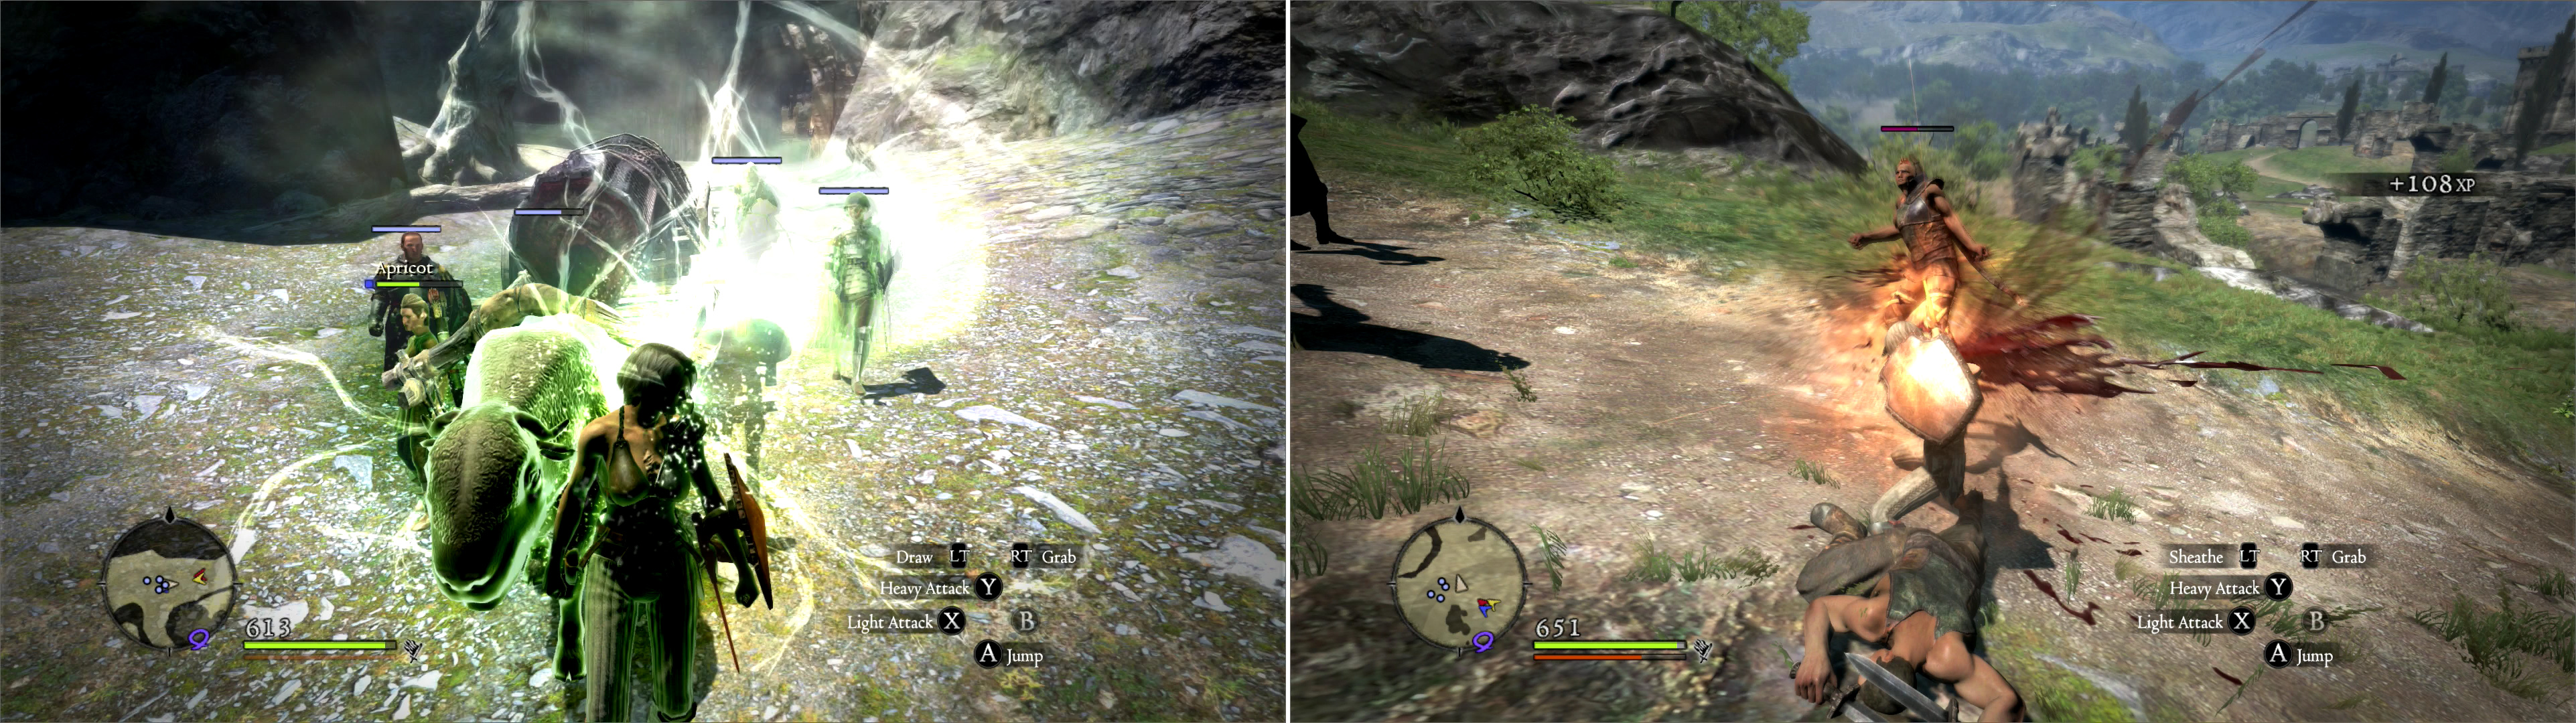 If your poor Oxen takes some bumps and bruises during travel, simply request help from your Pawns and stand in front of it to give it some collateral healing (left). Bandits on the Estan Plains will be your last challenge enroute to Gran Soren (right).